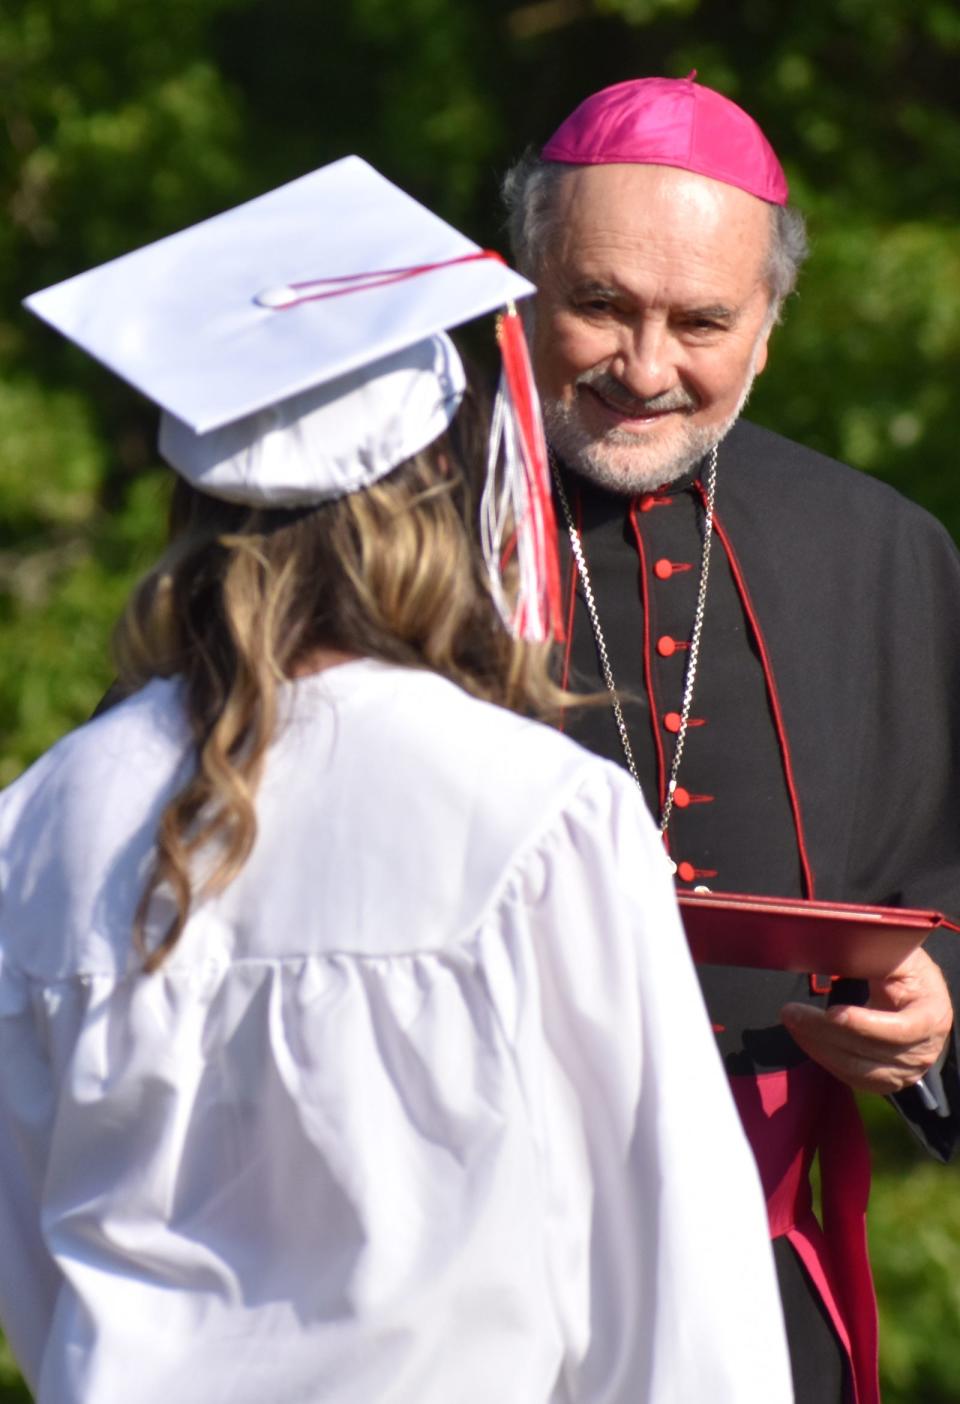 Diocese of Fall River Bishop Edgar M. da Cunha hands a diploma to Cadence Olivia Camara at the school's commencement ceremony on Wednesday, May 31, 2023.